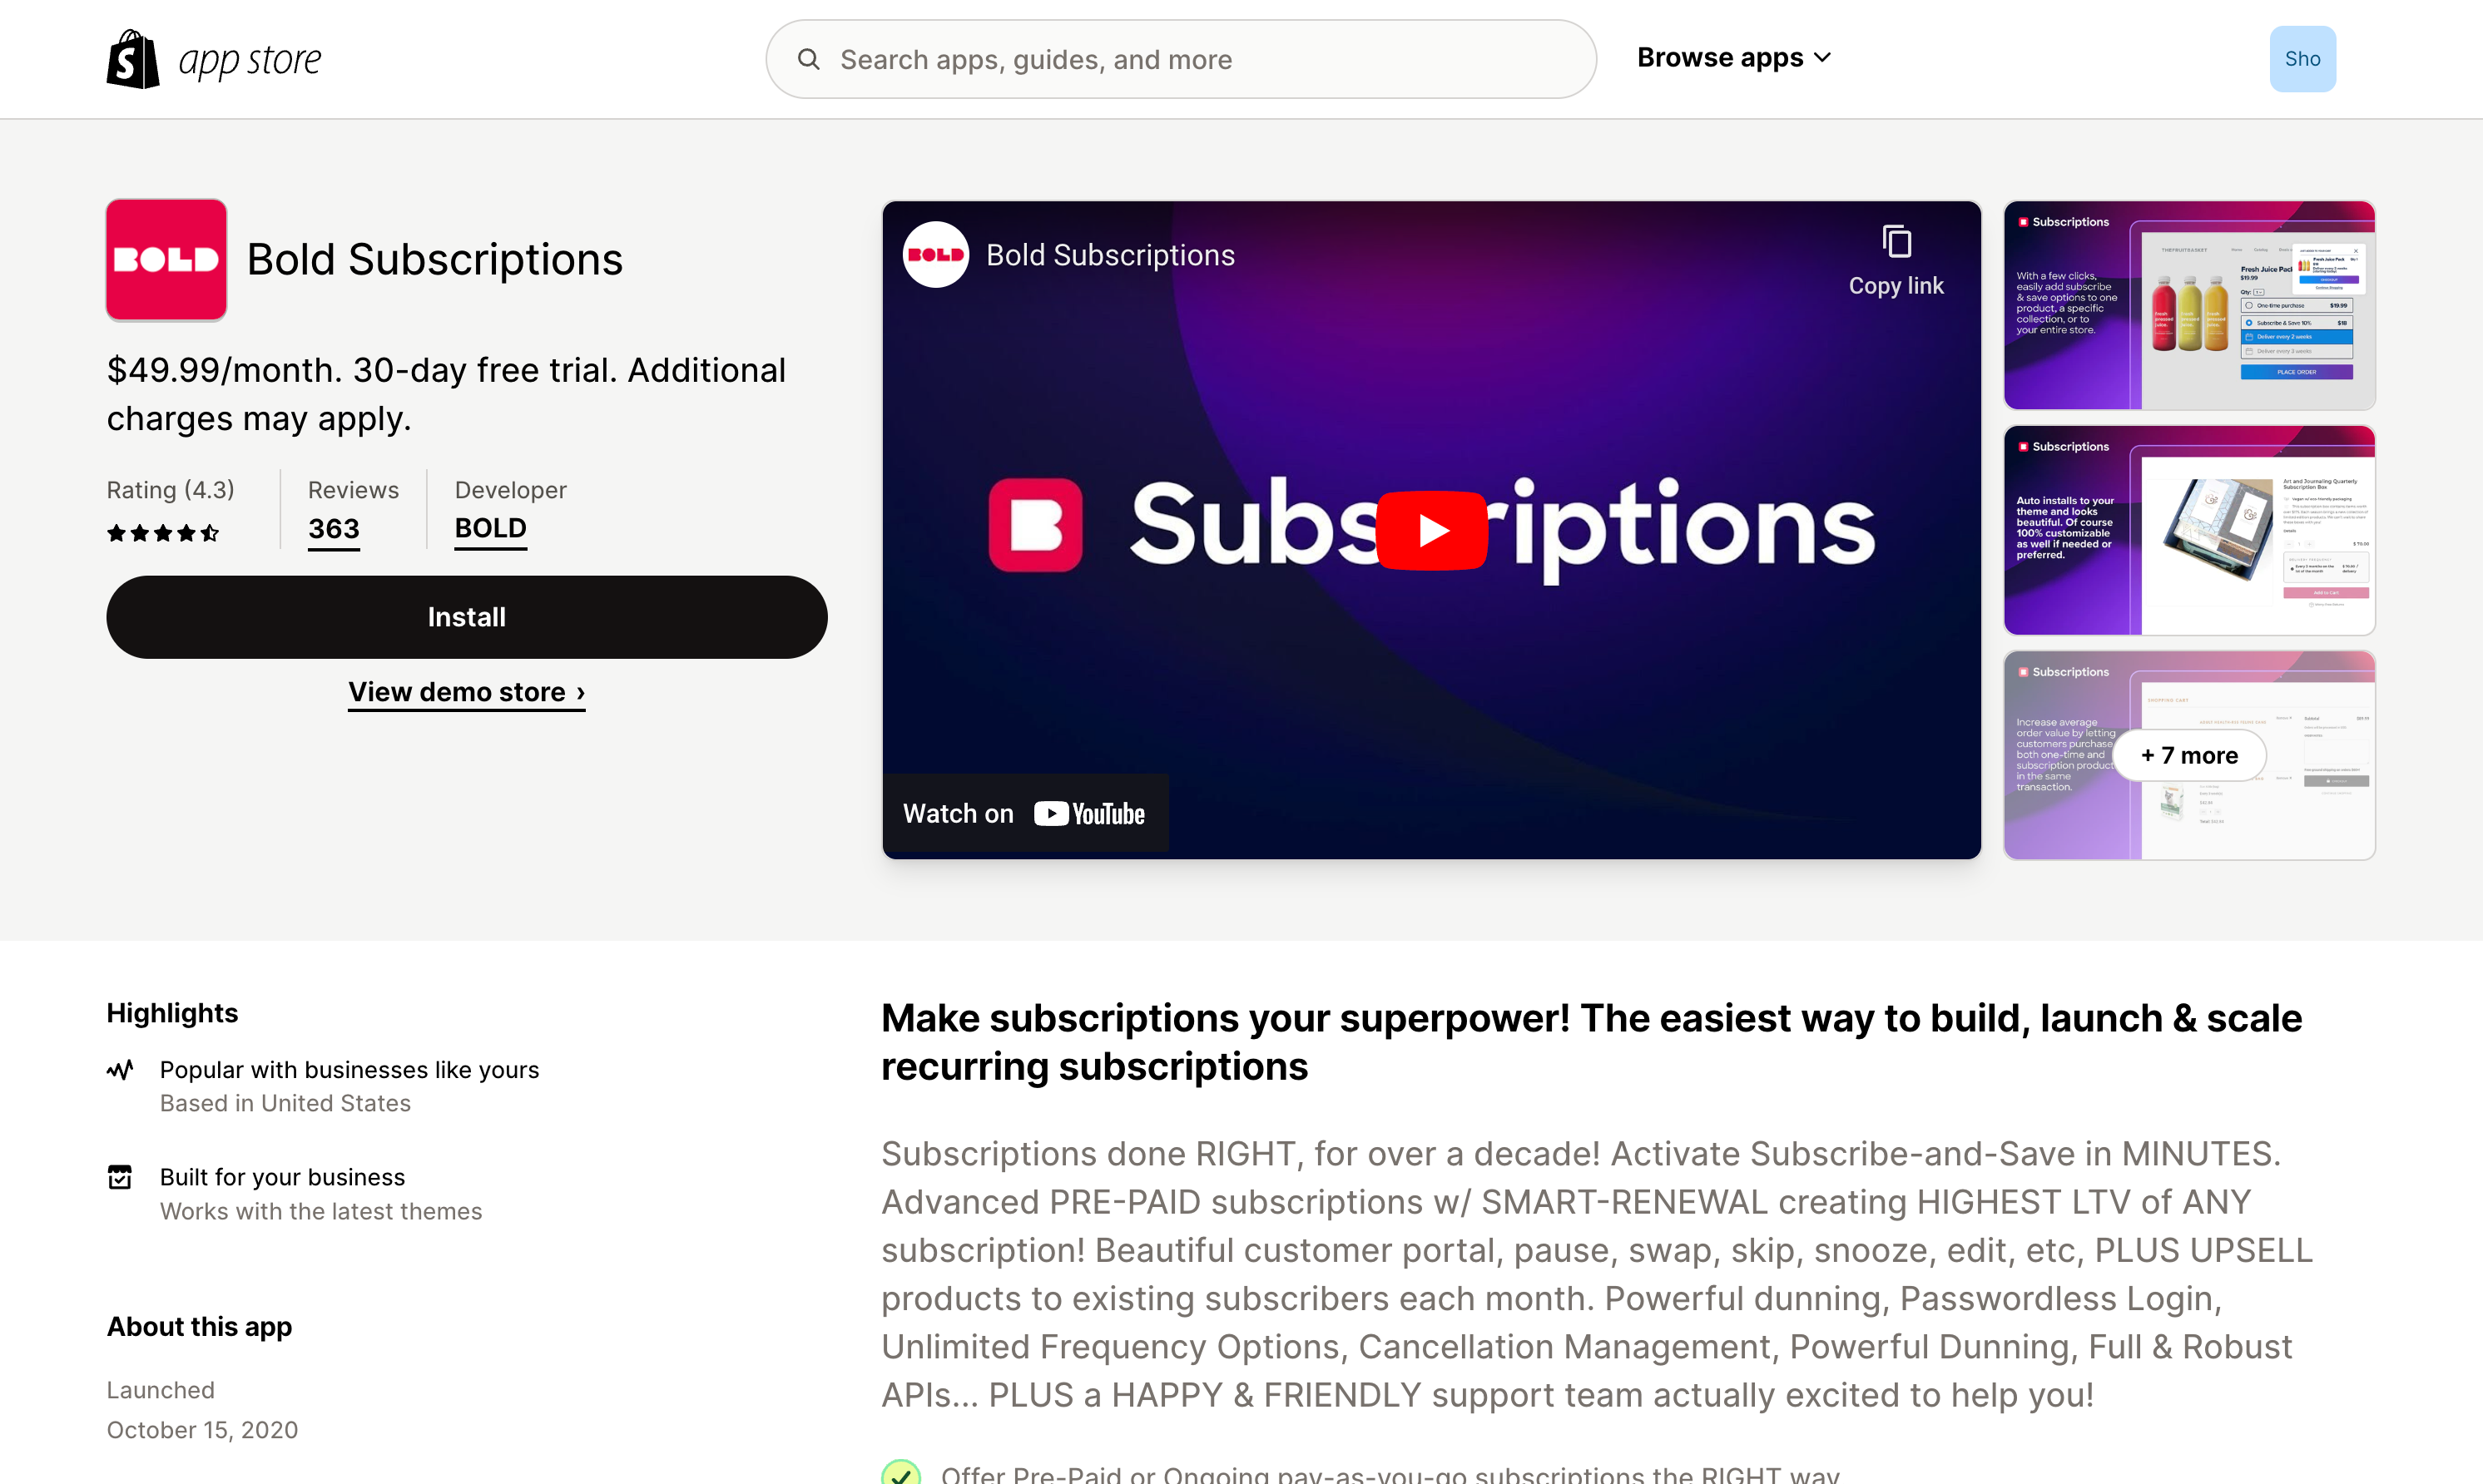 shopify app store - bold subscriptions